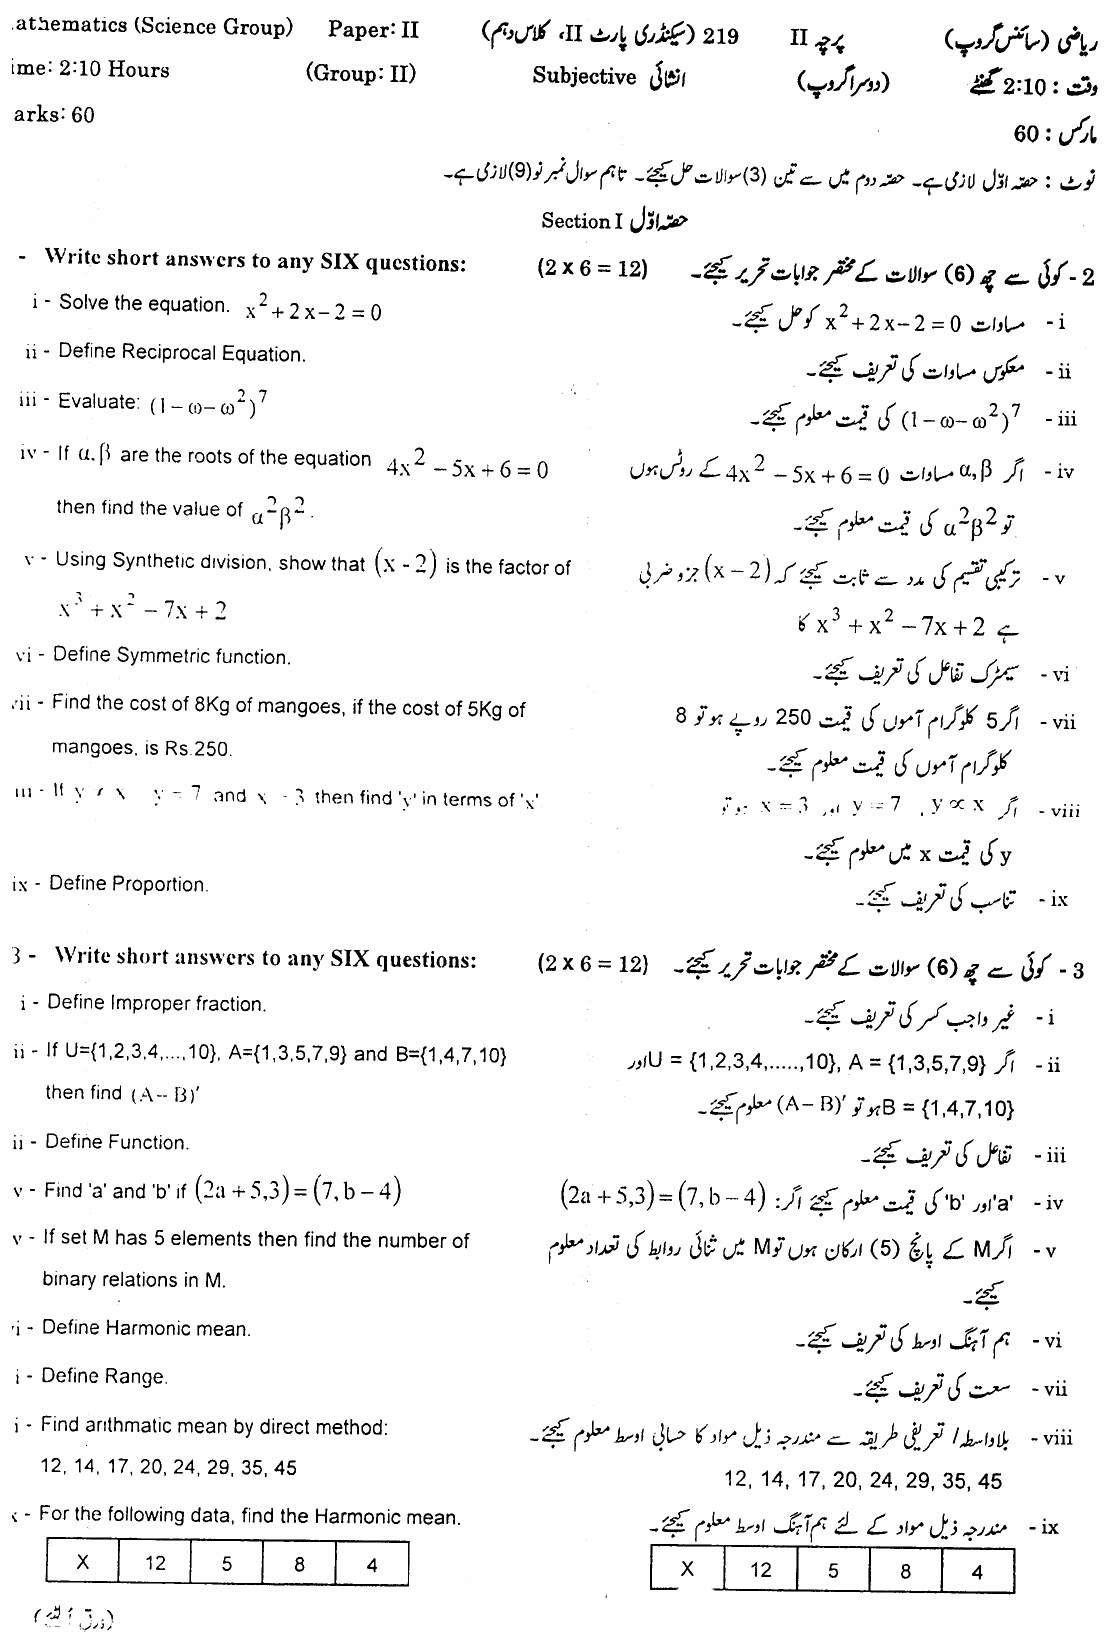 10th Class Mathematics Paper 2019 Gujranwala Board Subjective Group 2